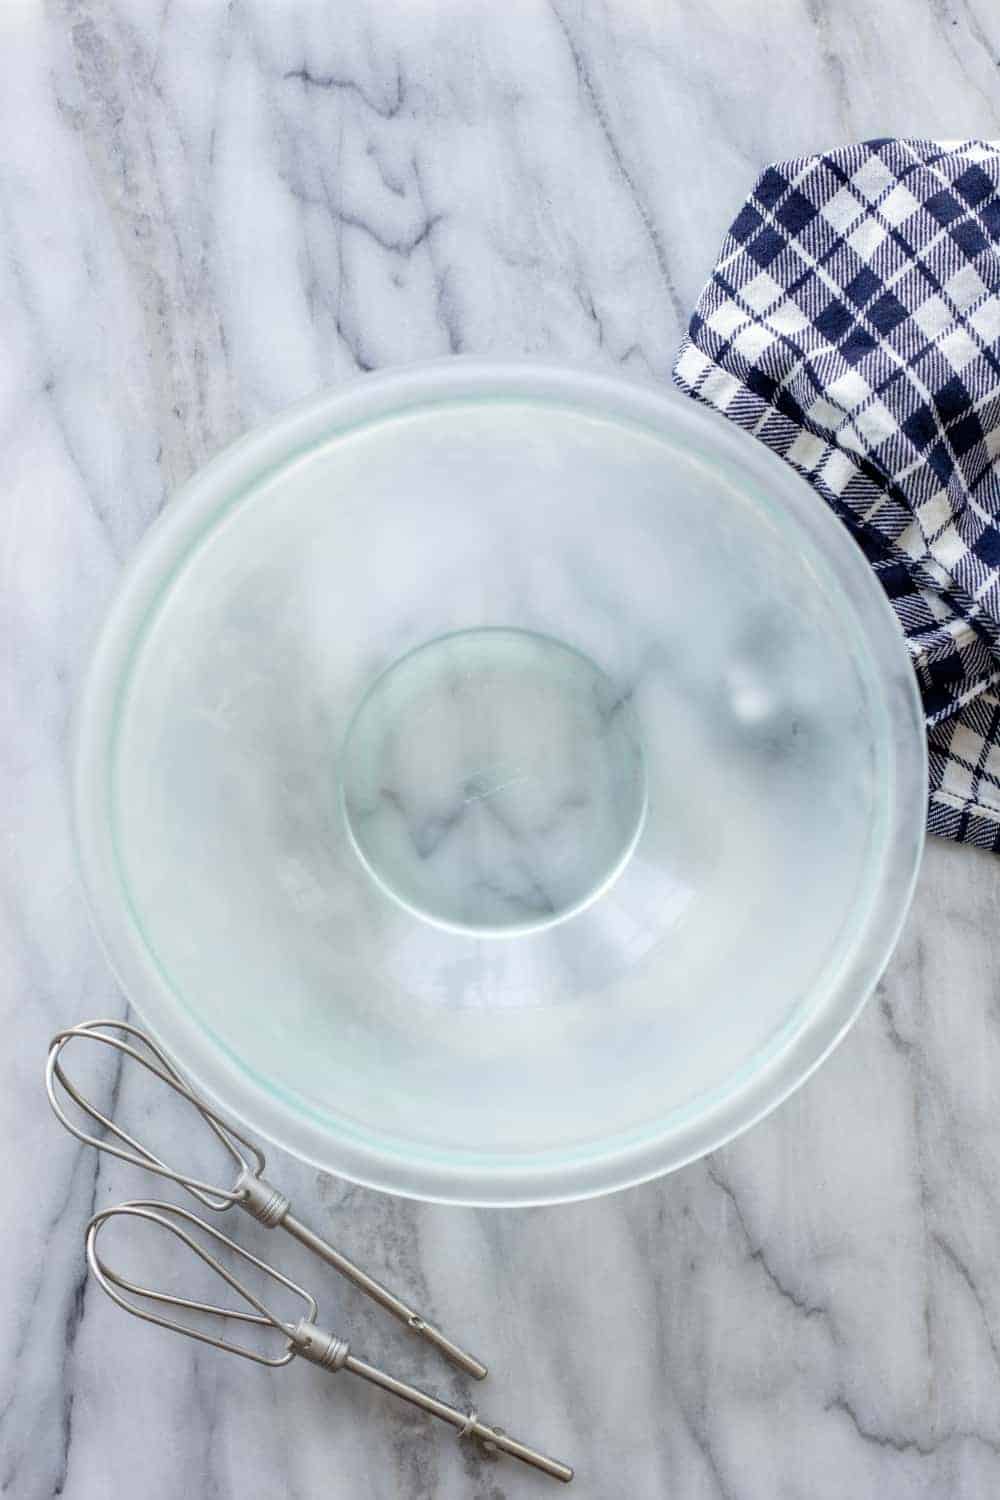 Cold glass mixing bowl and beaters on a marble counter